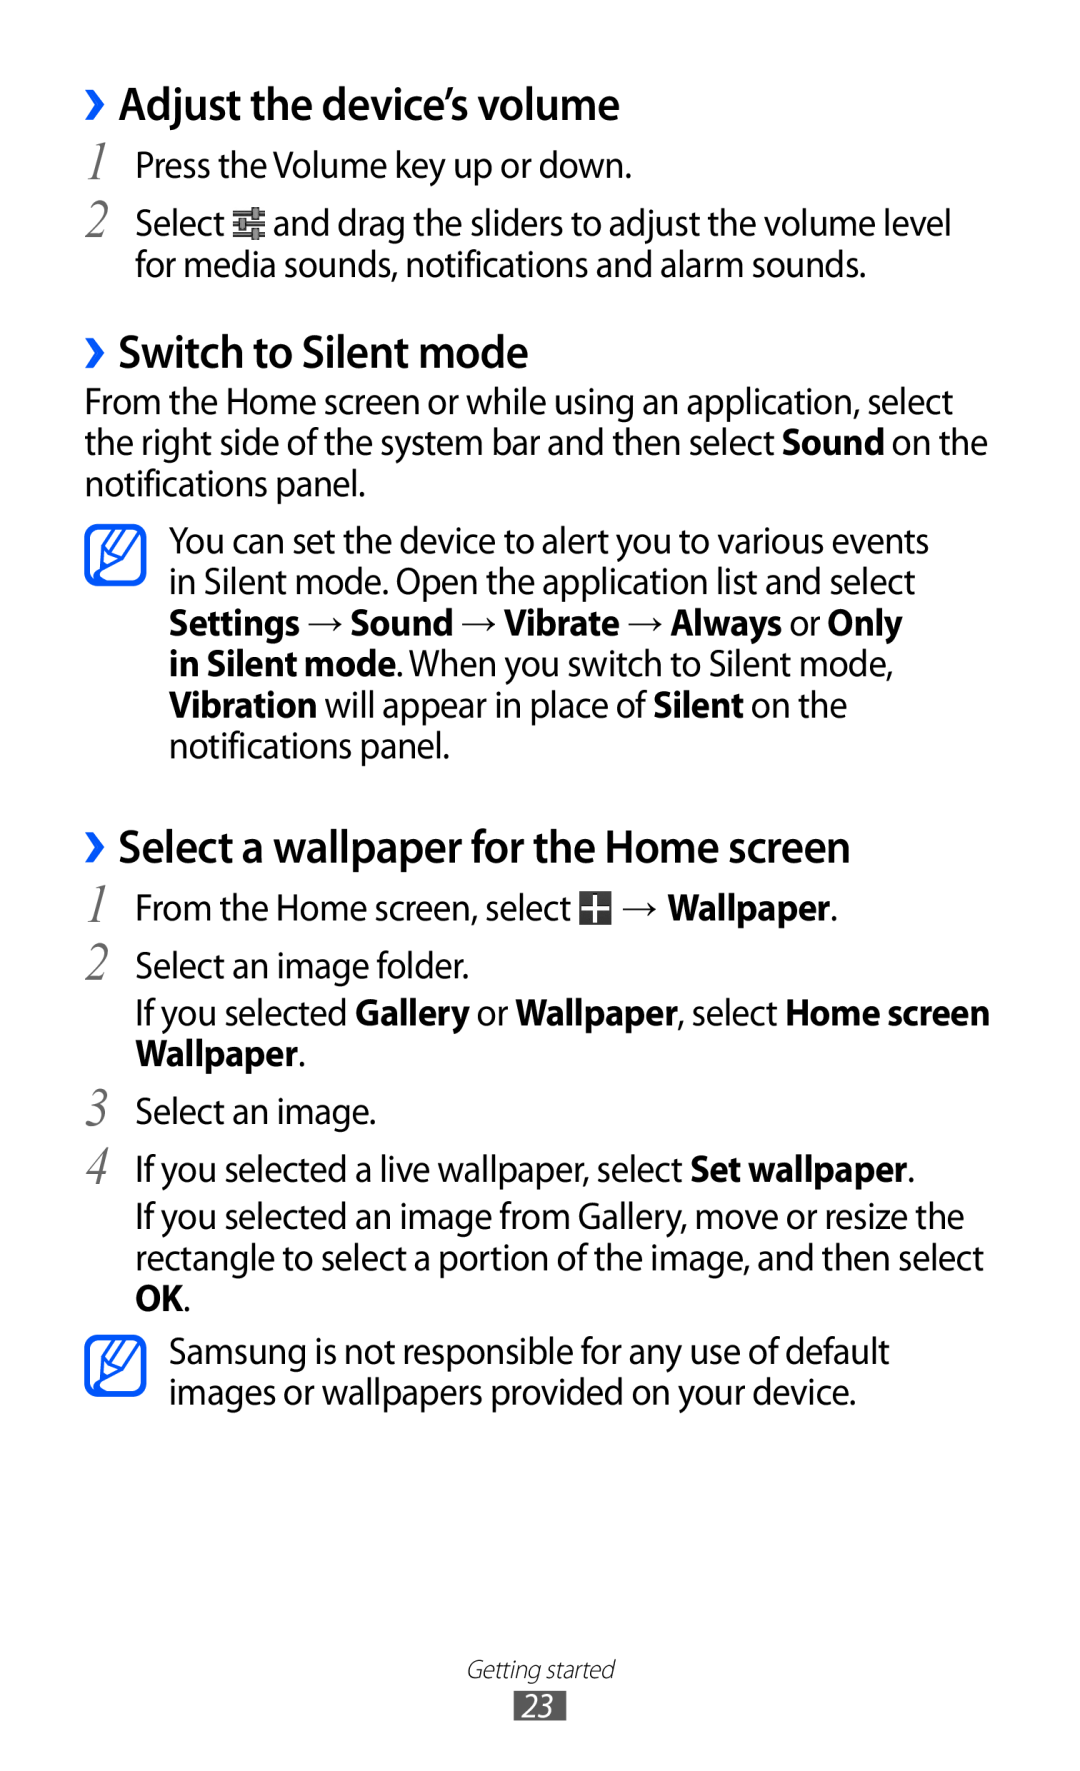 Samsung GT-P7310UWEXEF ››Adjust the device’s volume, ››Switch to Silent mode, ››Select a wallpaper for the Home screen 